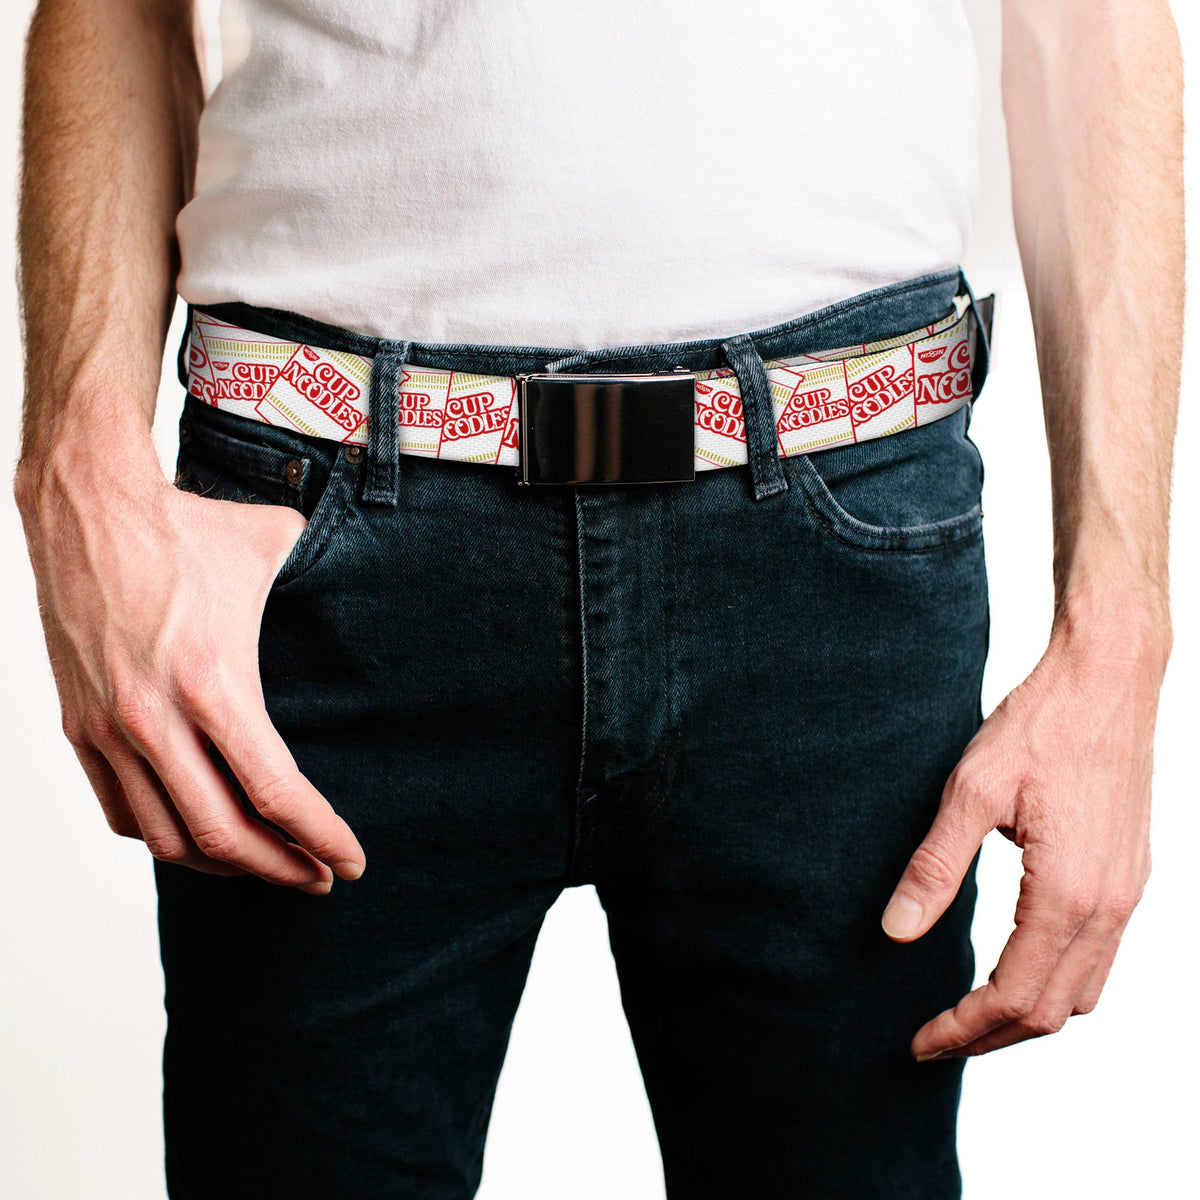 Chrome Buckle Web Belt - Cup Noodles Cups Stacked Collage White/Gold/Red Webbing